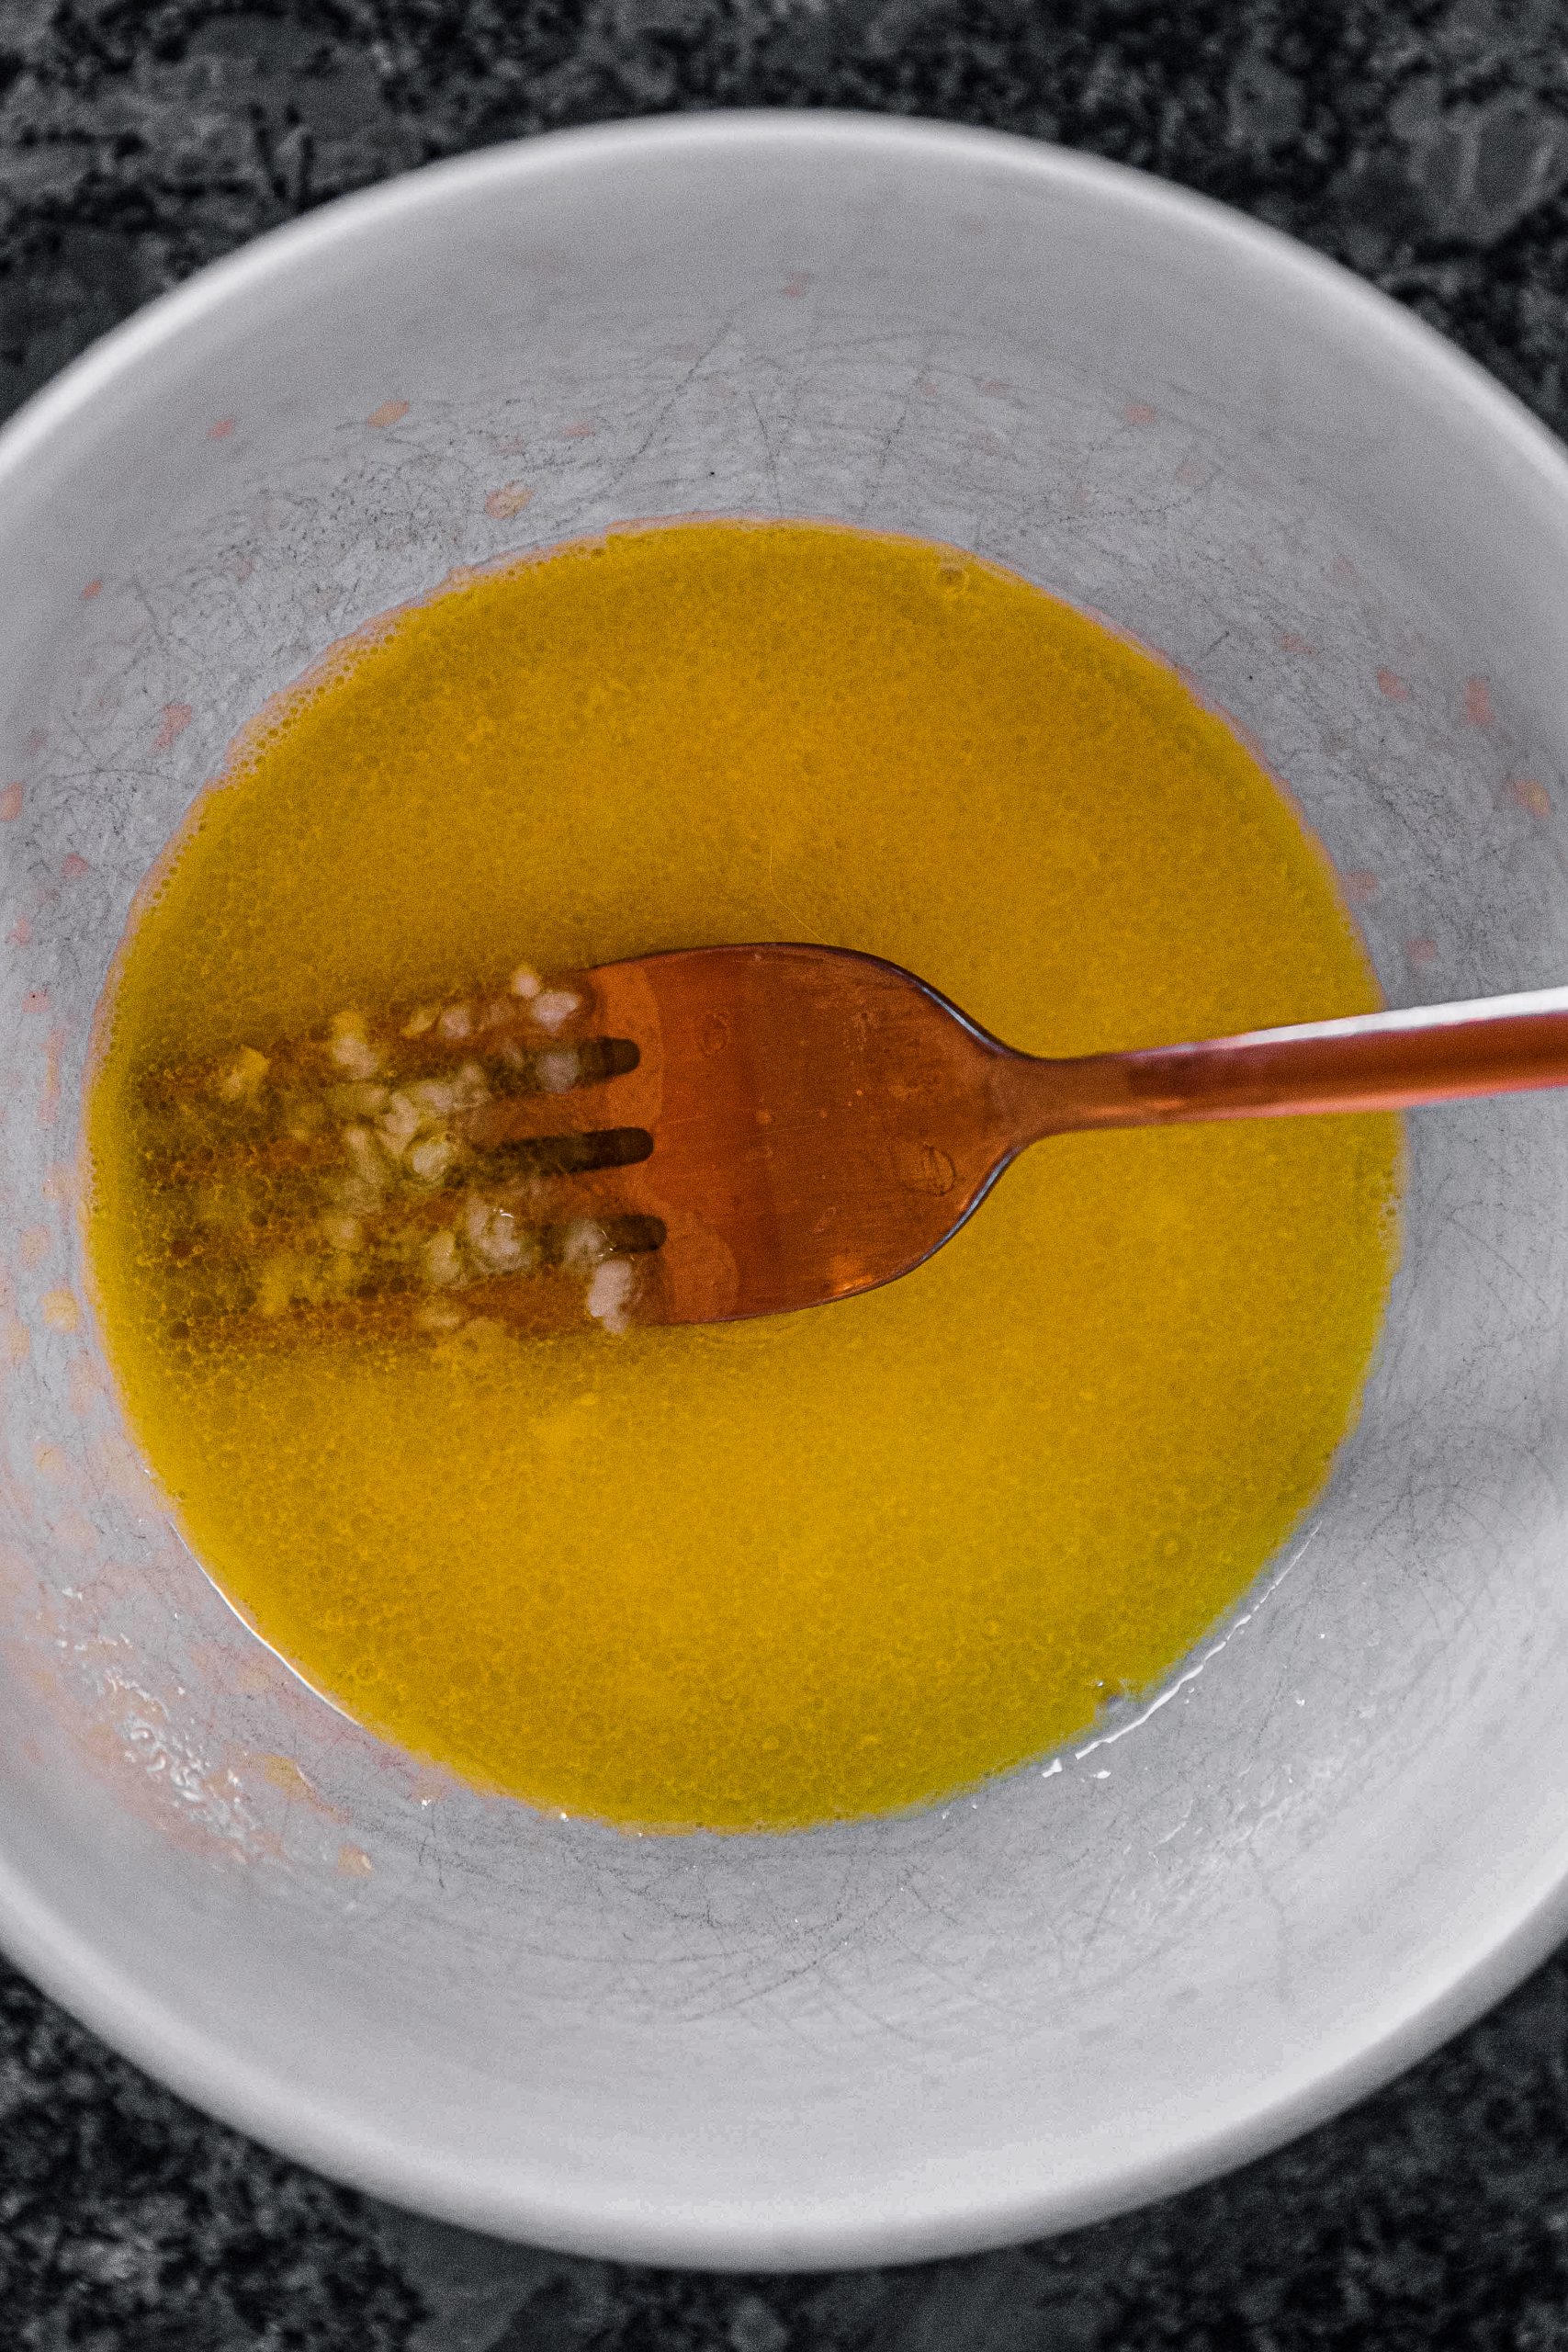 In a bowl, whisk together melted butter, minced garlic, honey and lemon juice.